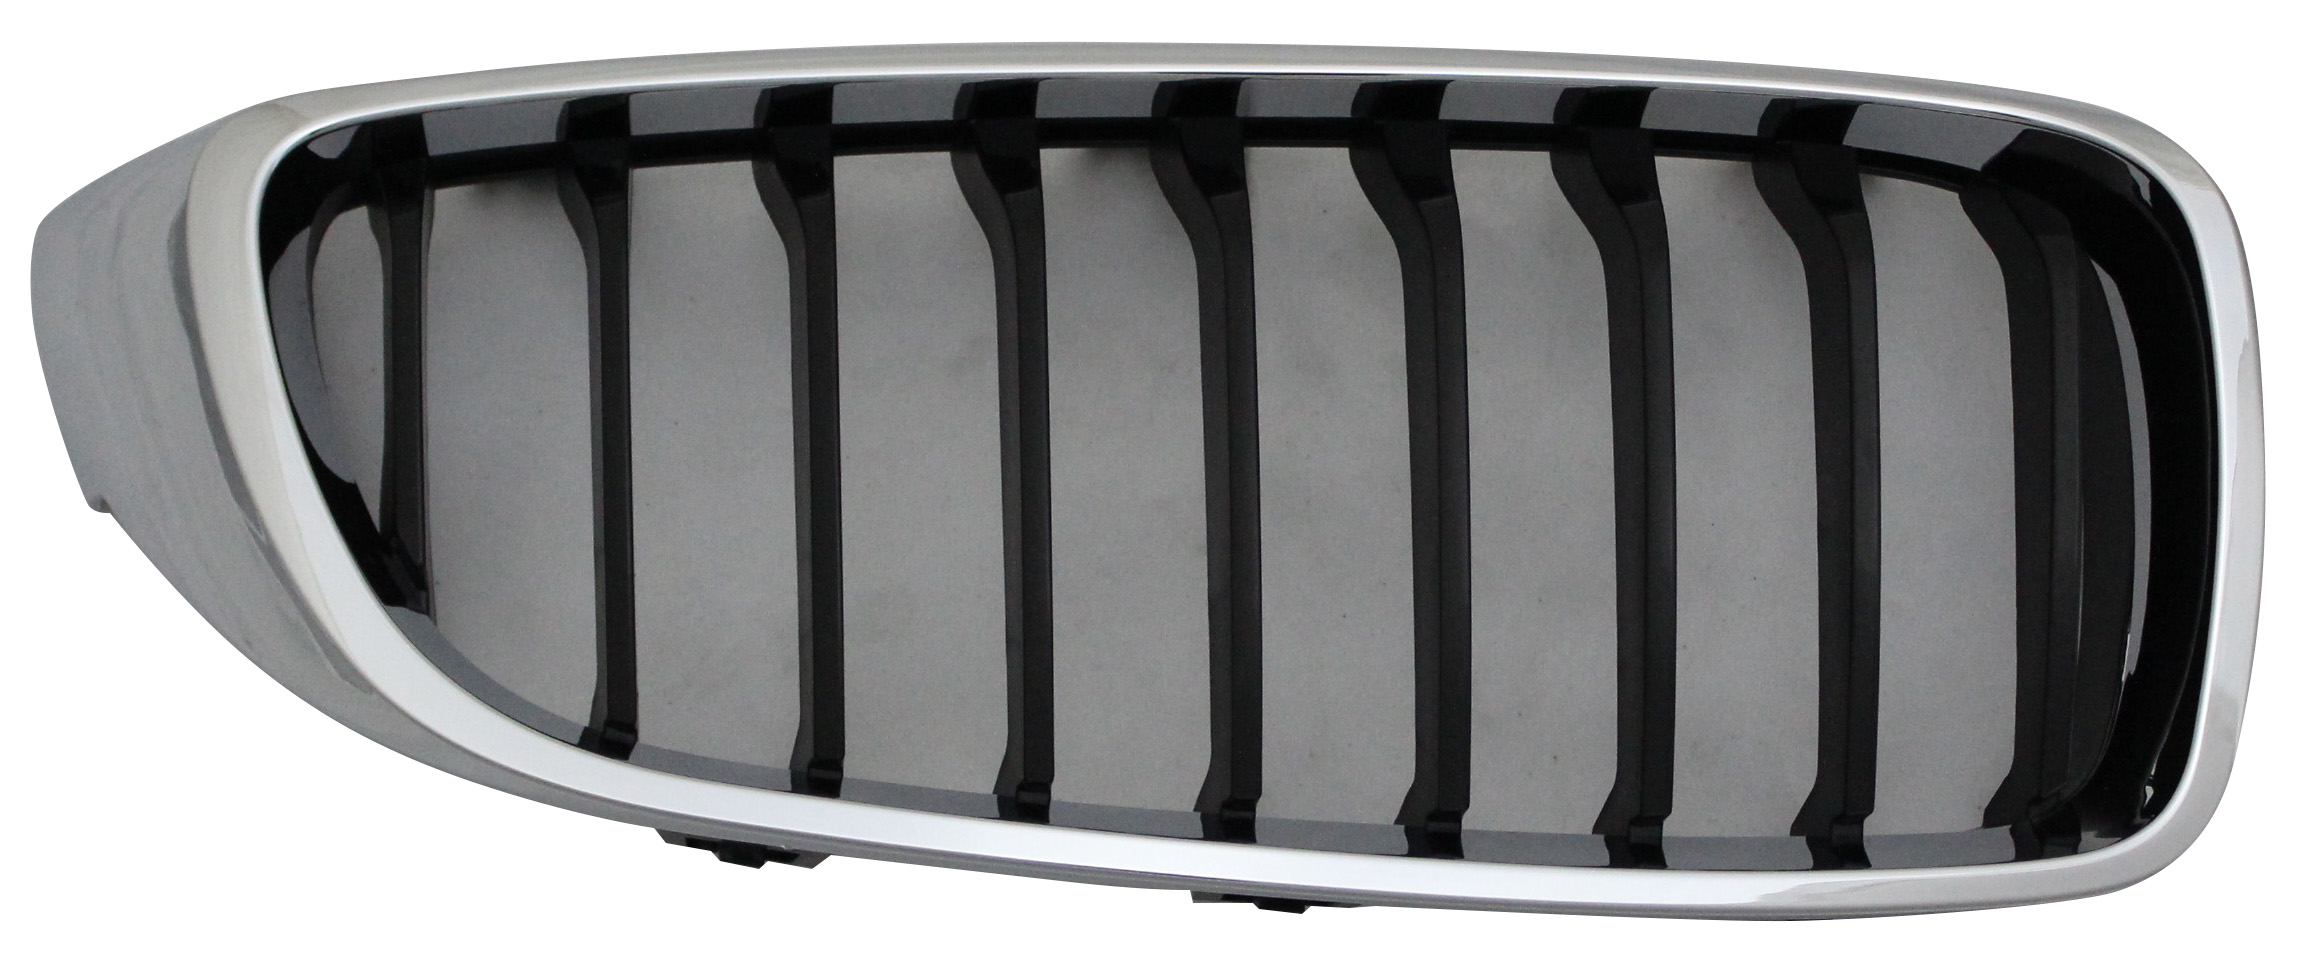 Aftermarket GRILLES for BMW - 435I GRAN COUPE, 435i Gran Coupe,15-16,Grille assy